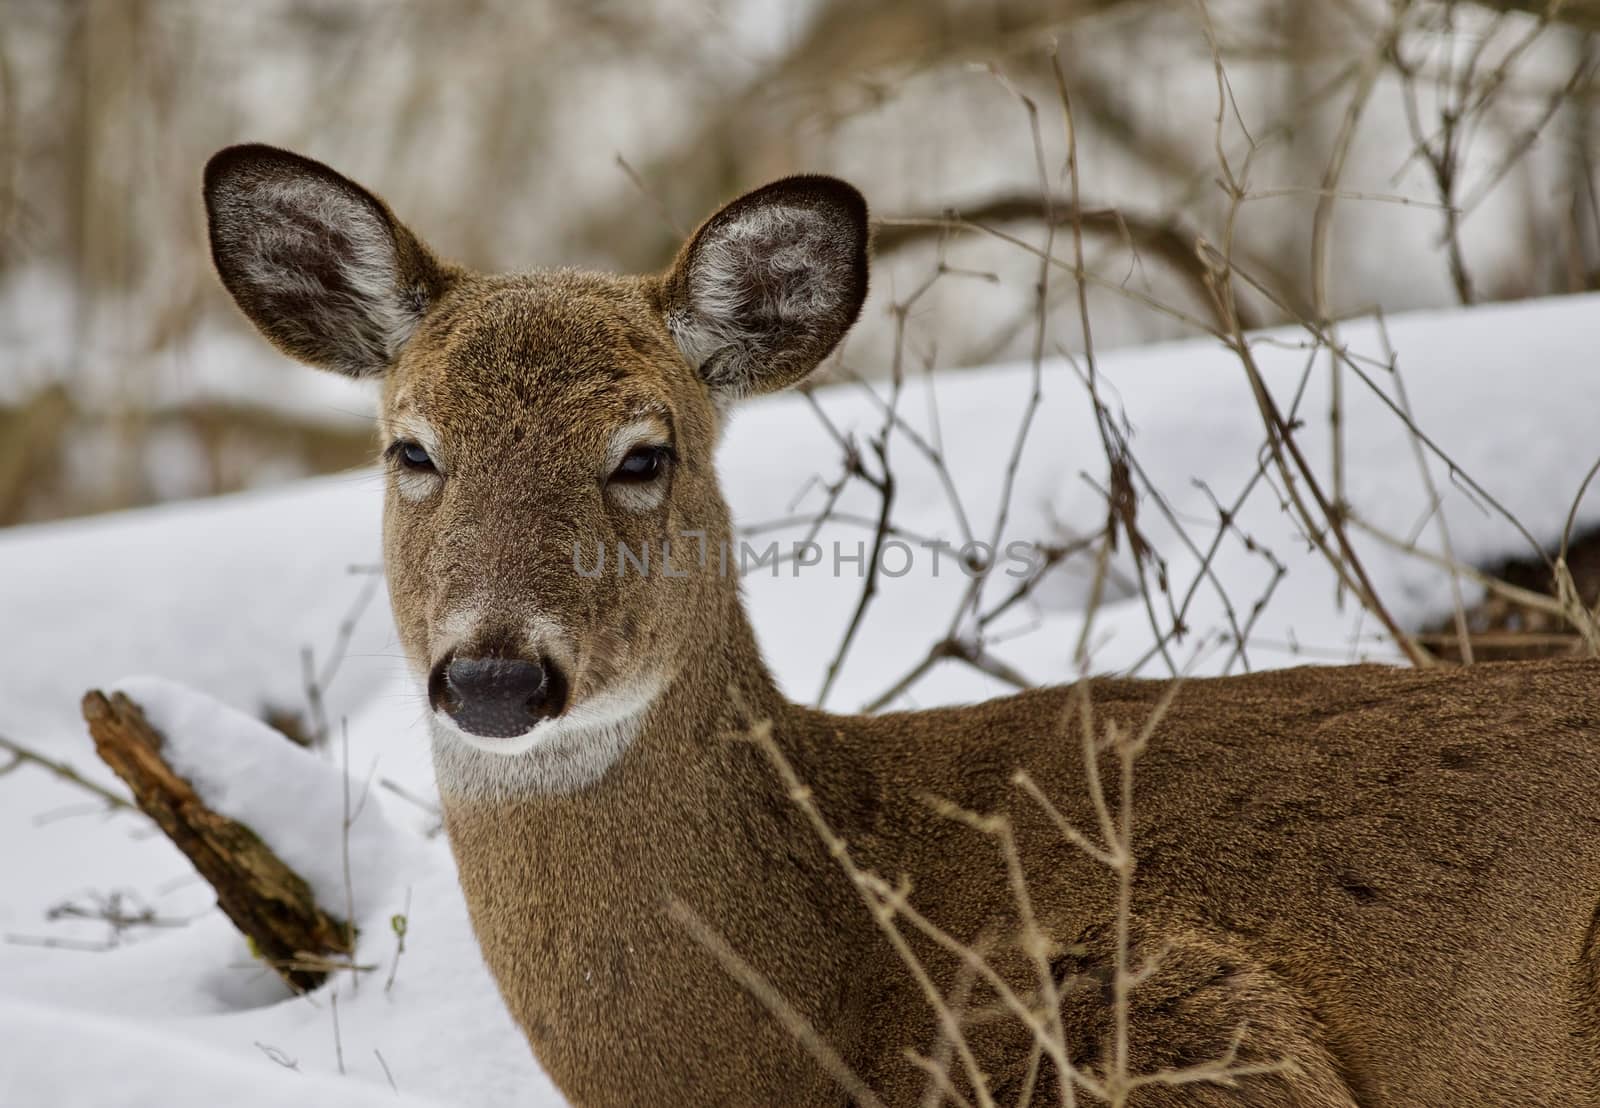 Beautiful image of a cute wild deer in the snowy forest by teo